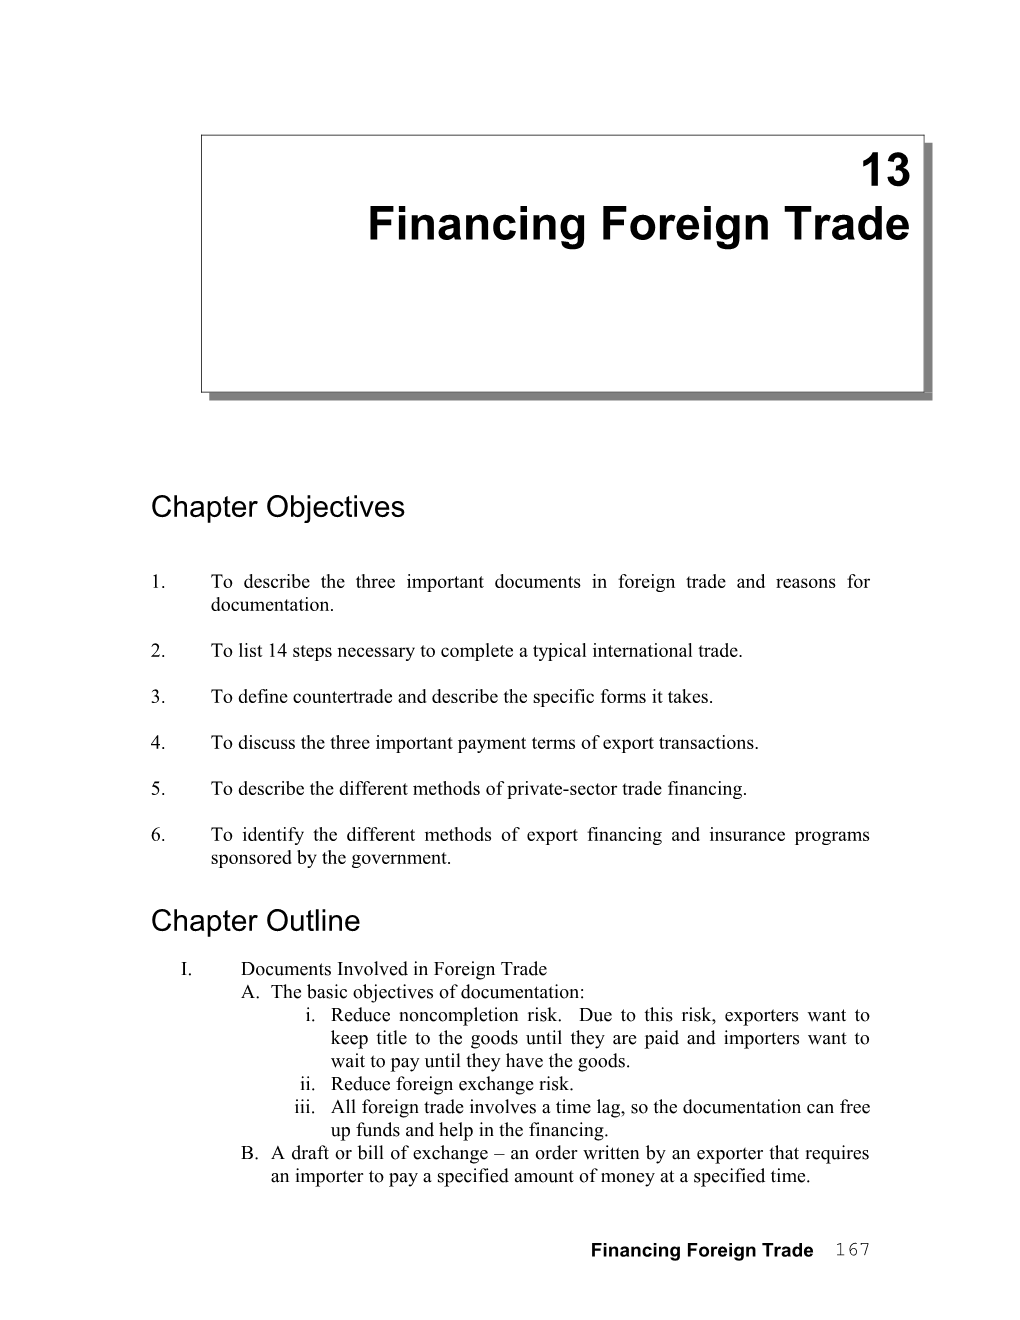 1. to Describe the Three Important Documents in Foreign Trade and Reasons for Documentation